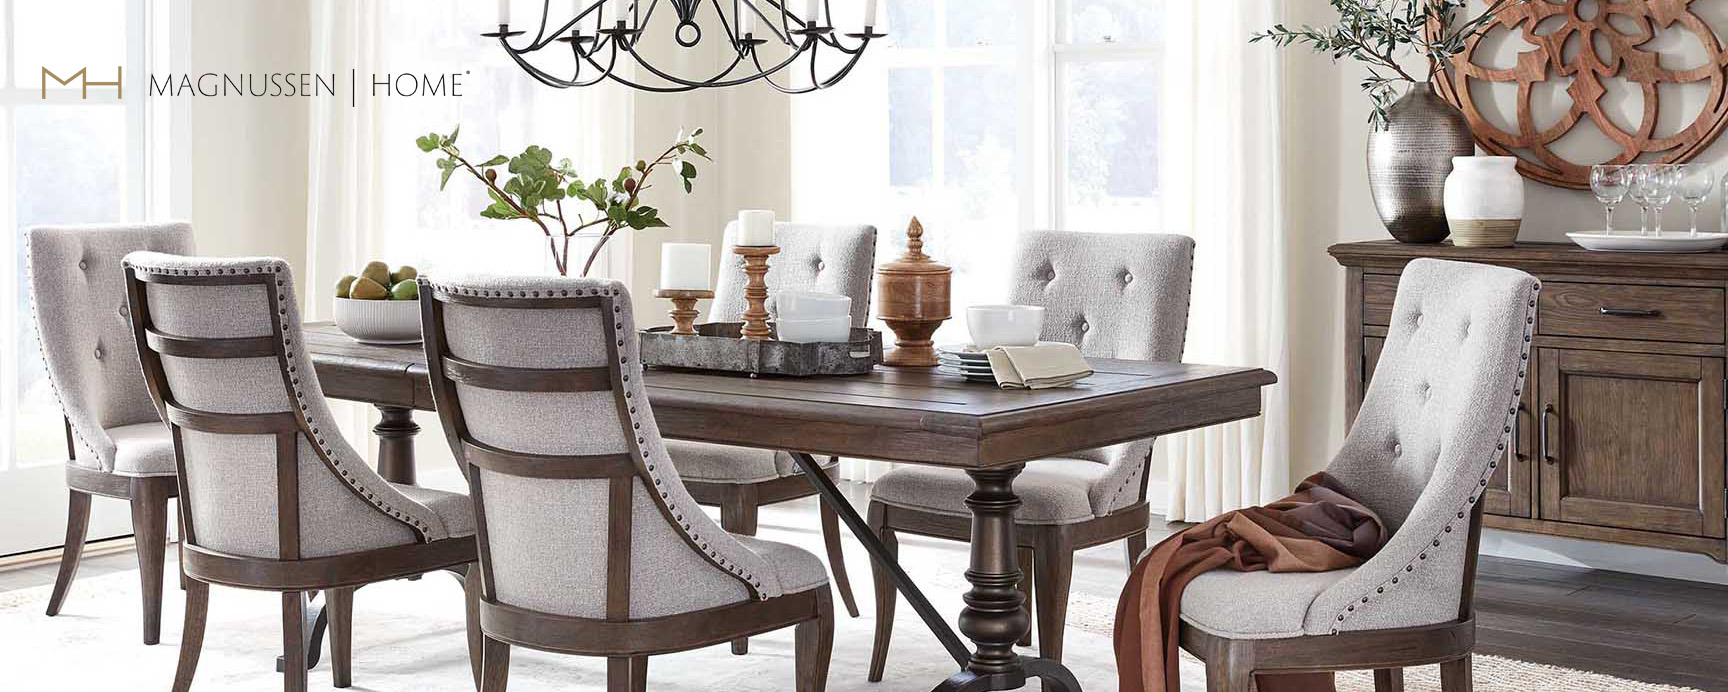 Save on Magnussen Home